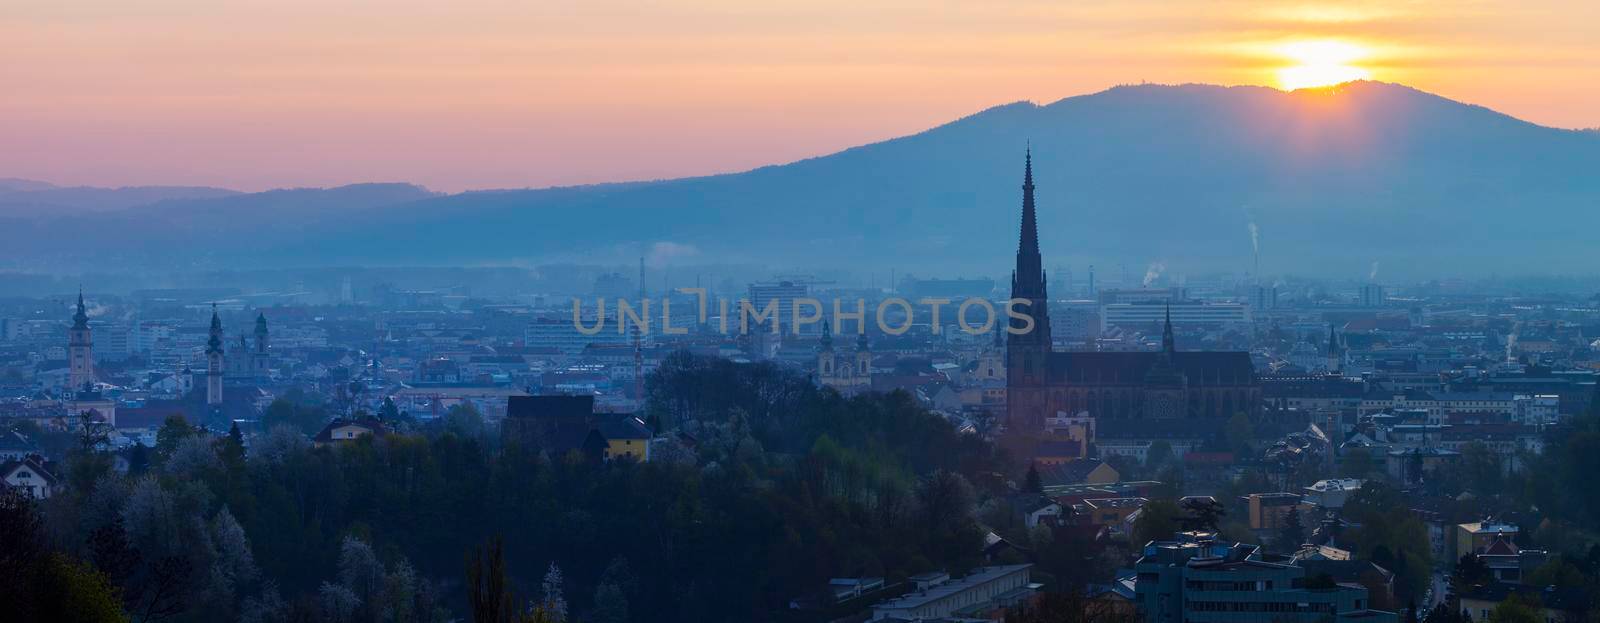 Linz panorama at sunrise by benkrut